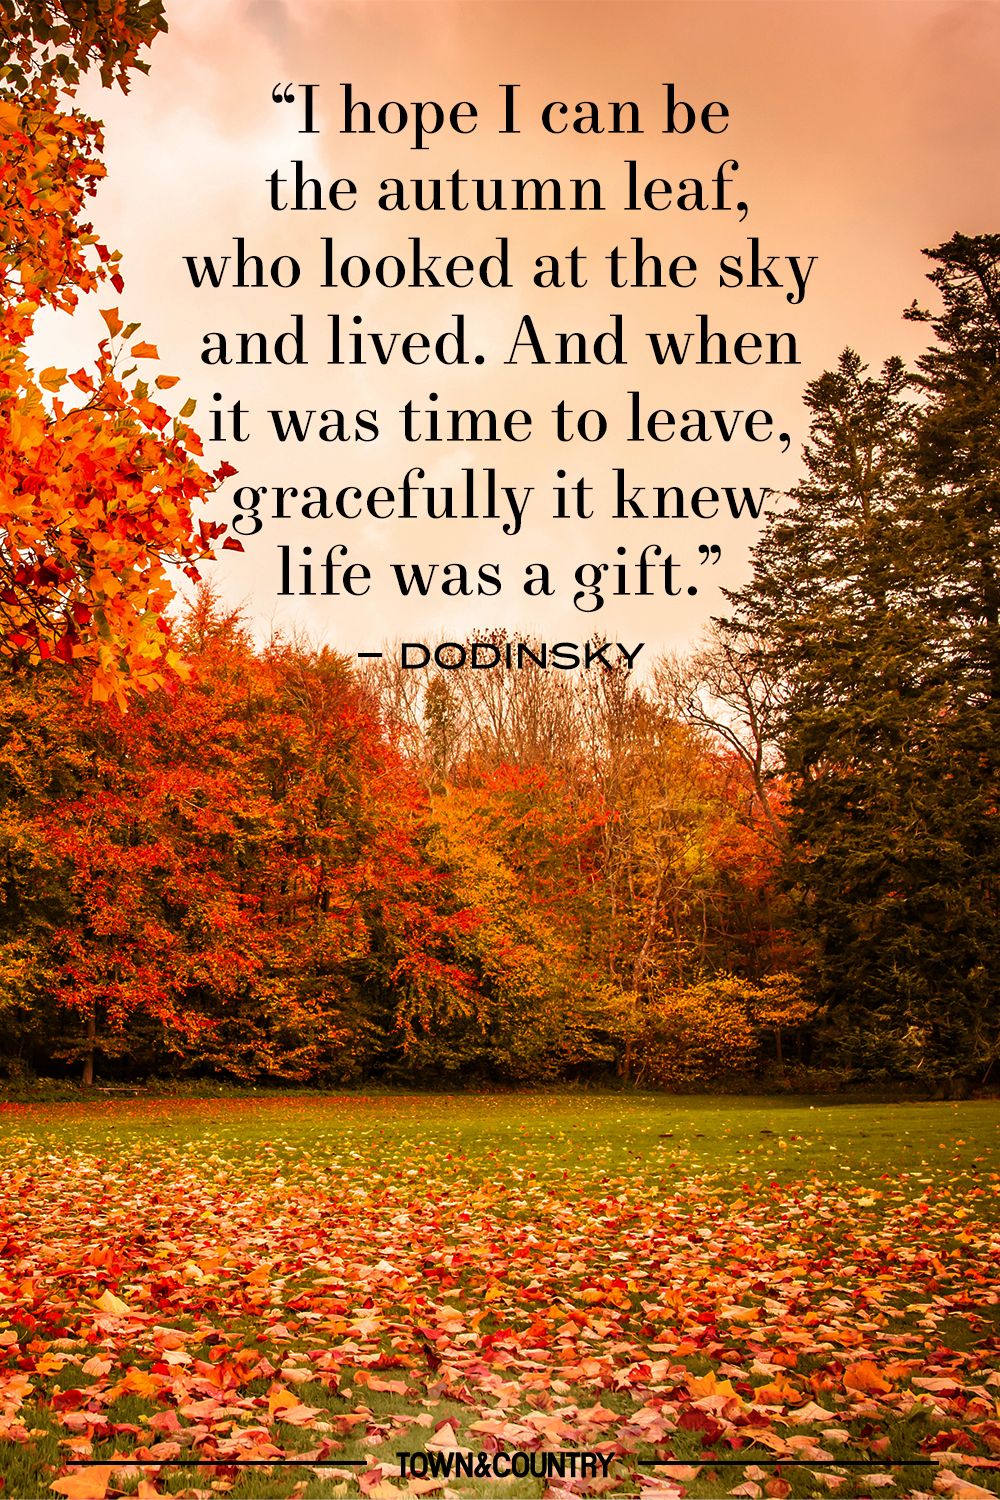 30+ Inspiring Fall Quotes - Best Quotes And Sayings About Autumn